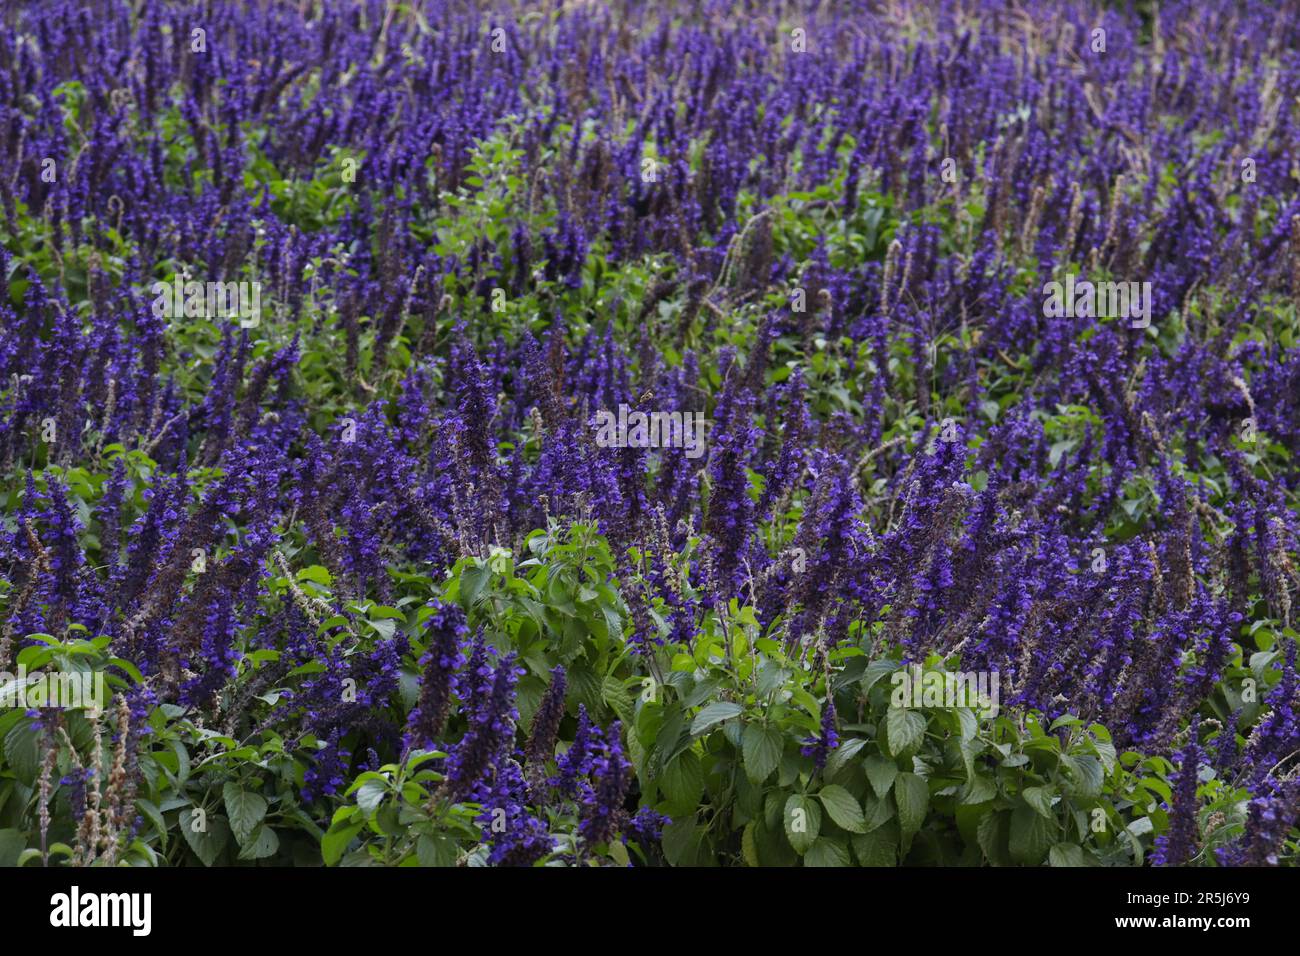 A Field Full of Blue Salvia, a Flower that has Purple-ish Color Stock Photo